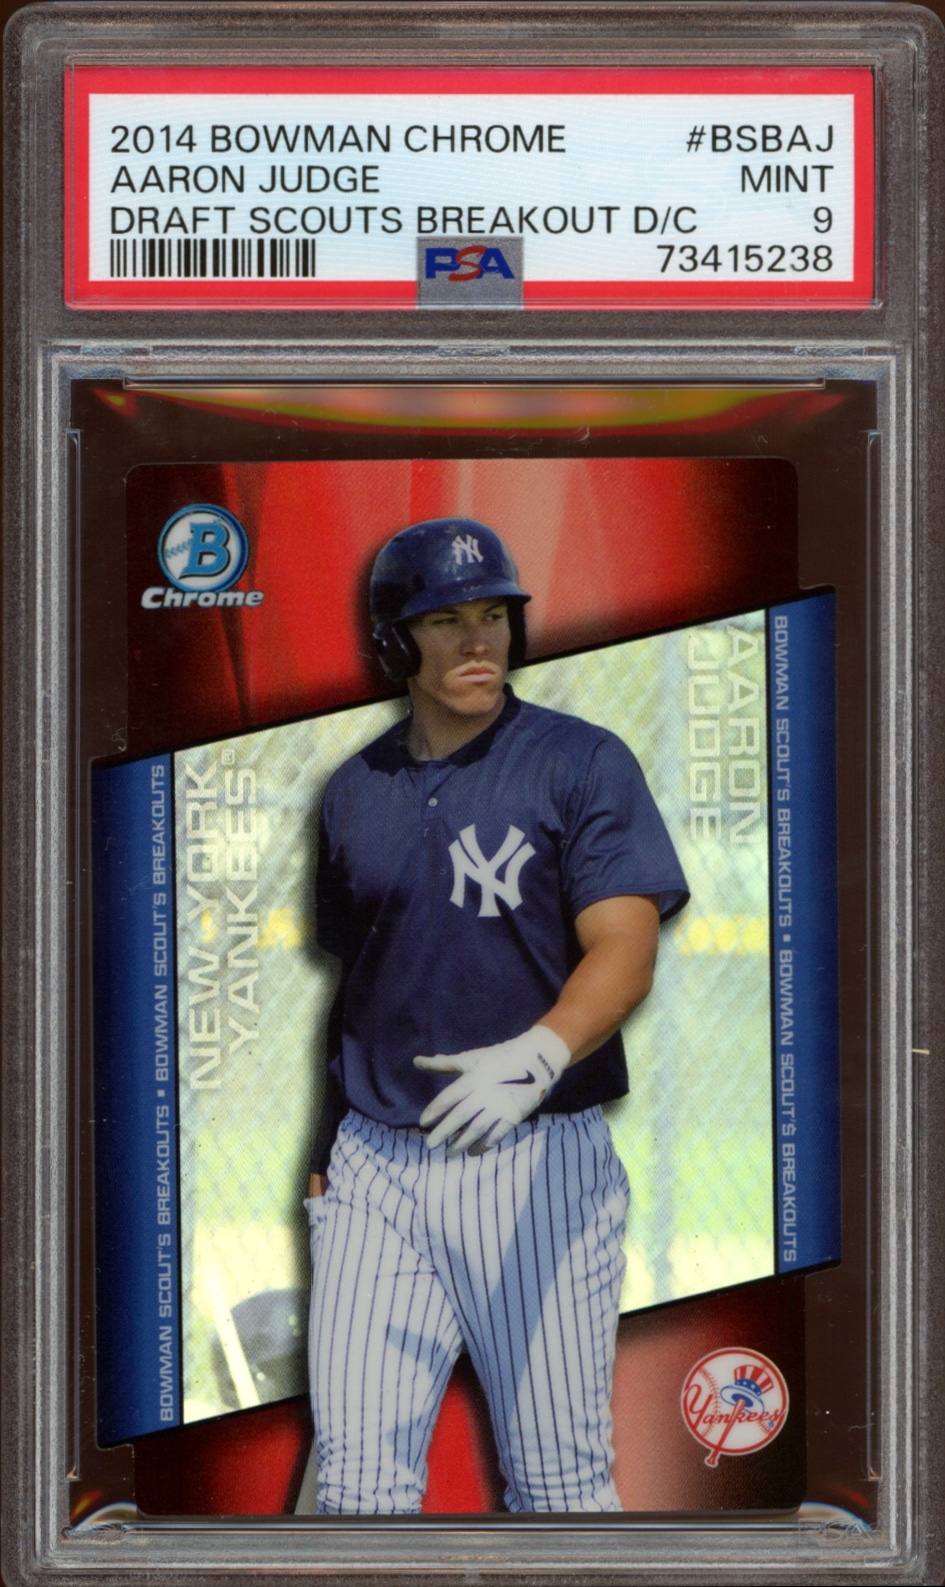 Graded Mint 9, 2014 Bowman Chrome card featuring Yankees player Aaron Judge in action.